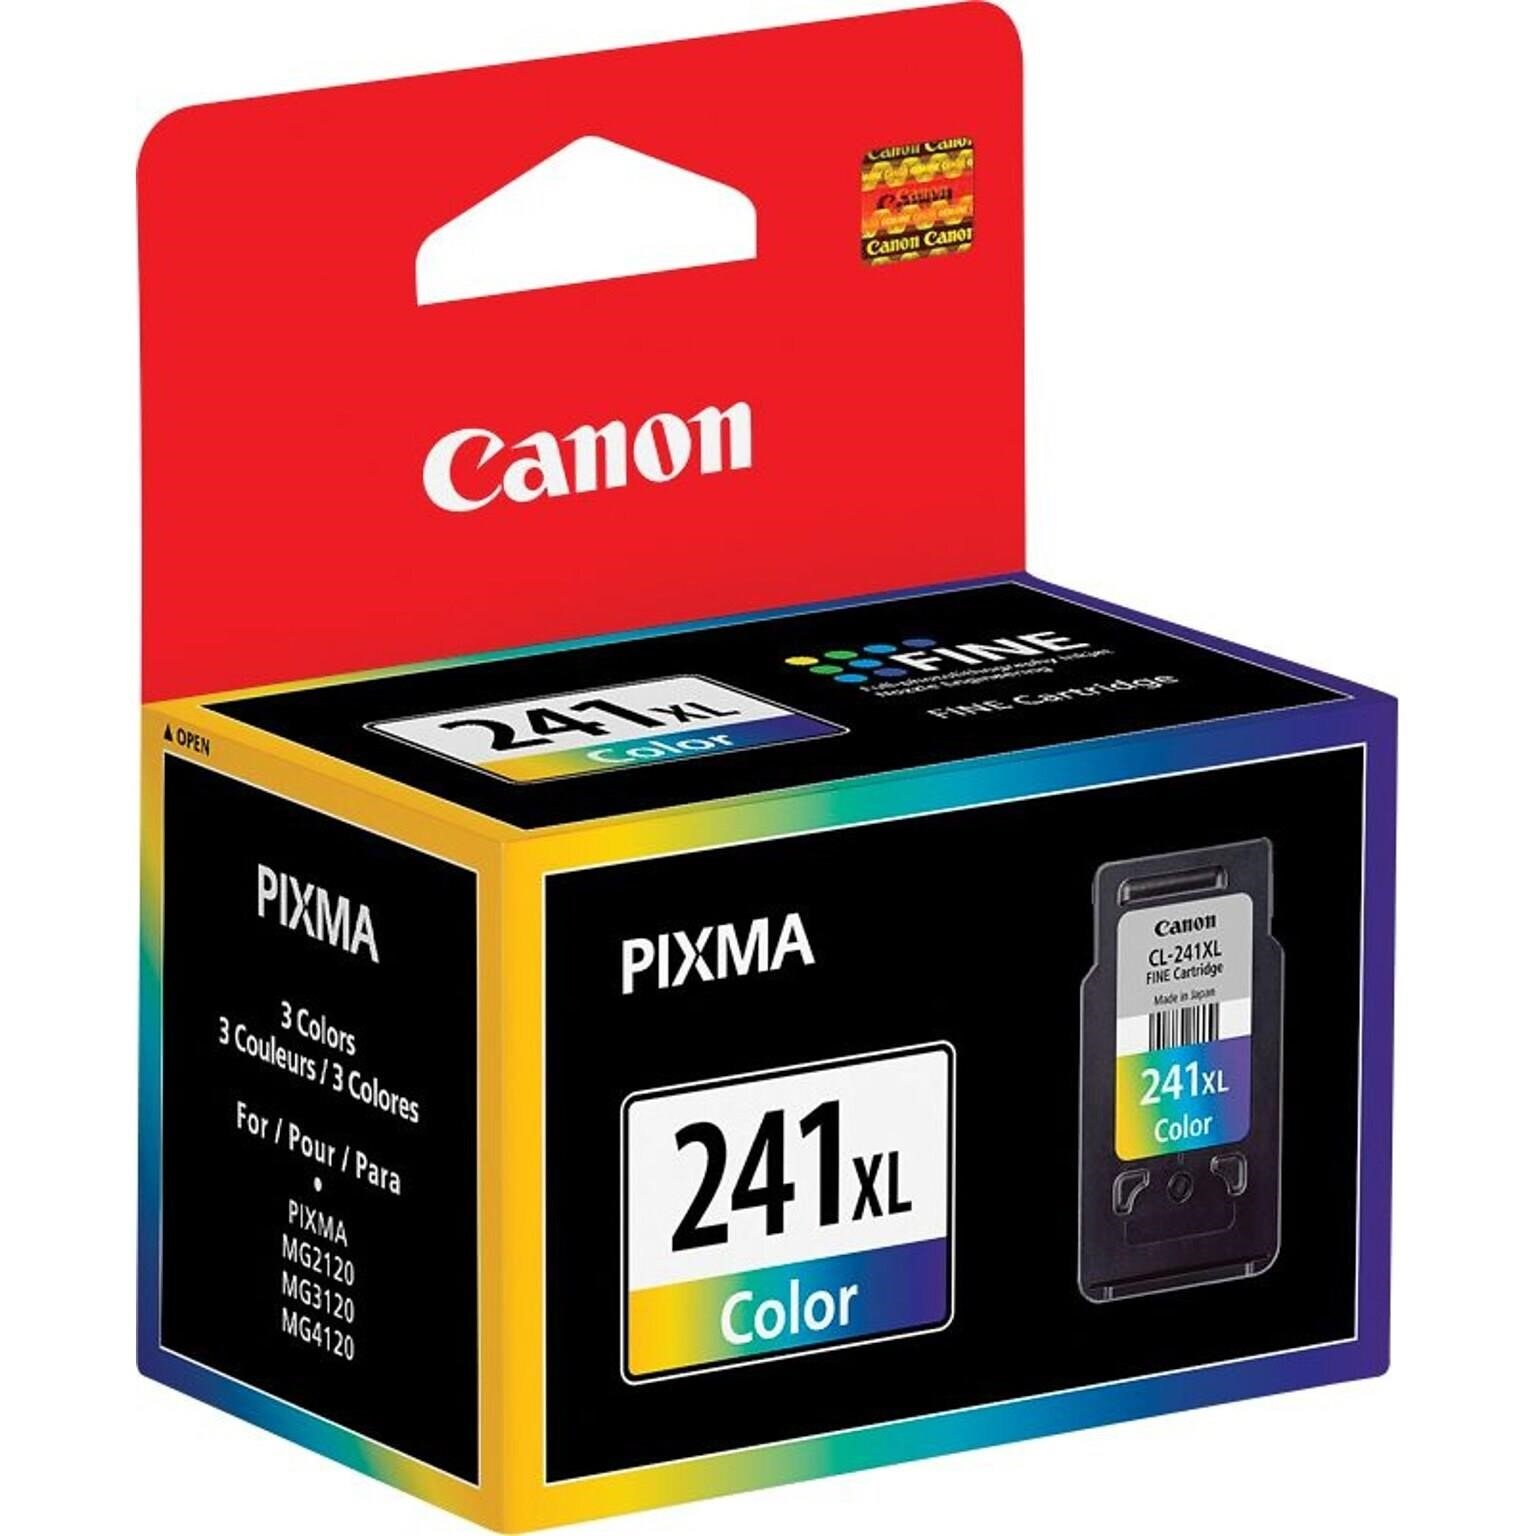 $40 Canon TriColor High Yield Ink Cartridge A85